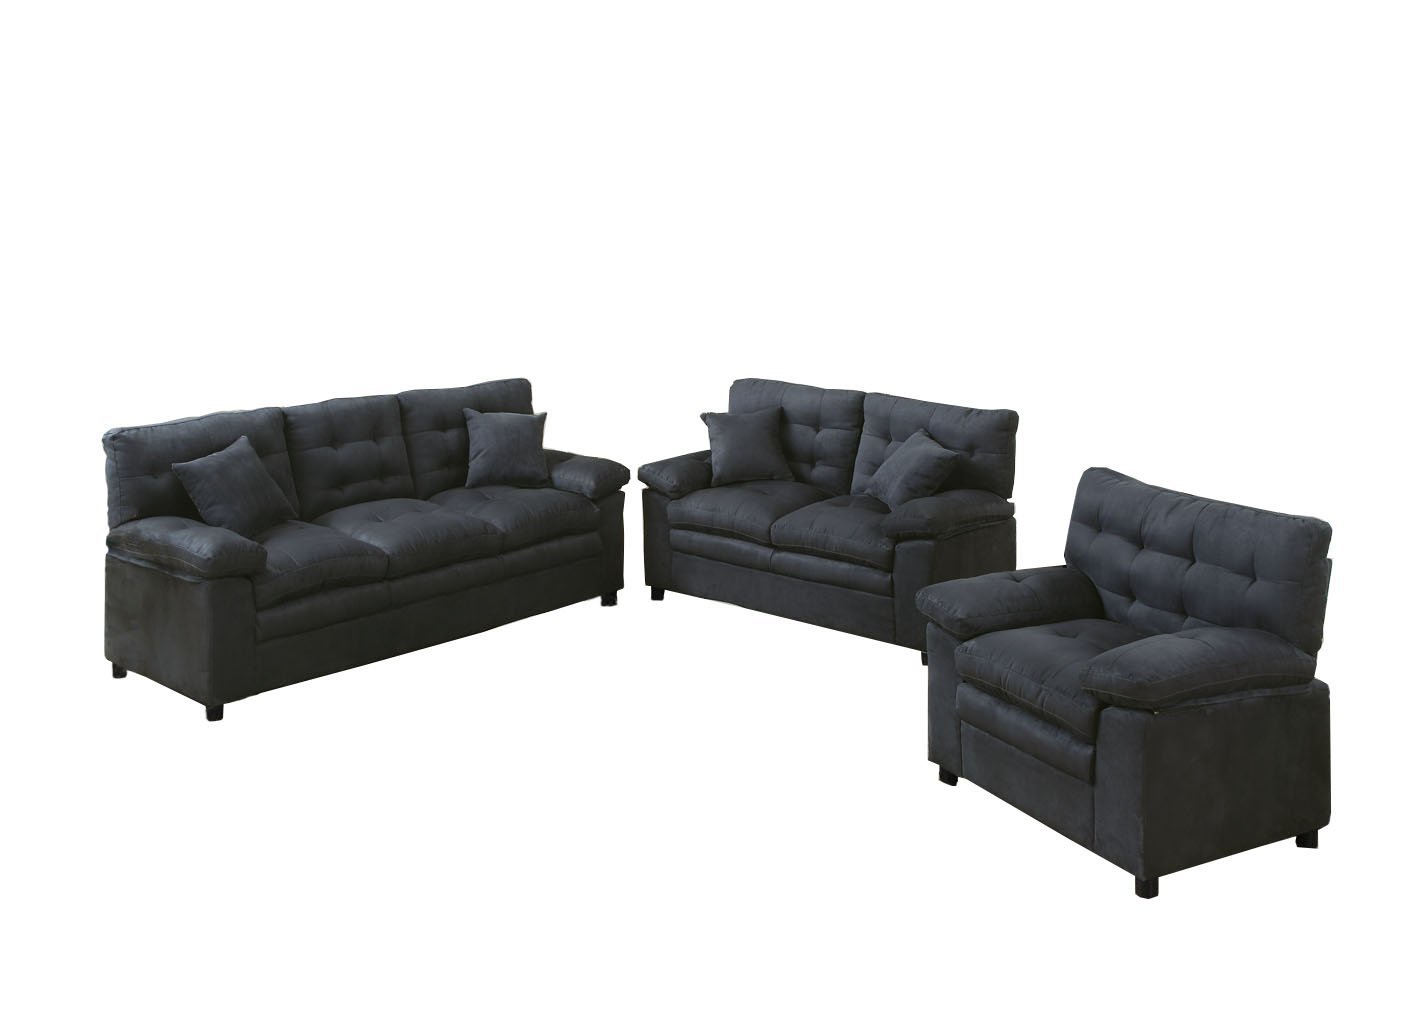 Poundex Bobkona Colona Mircosuede 3 Piece Sofa and Loveseat with Chair Set, Ash